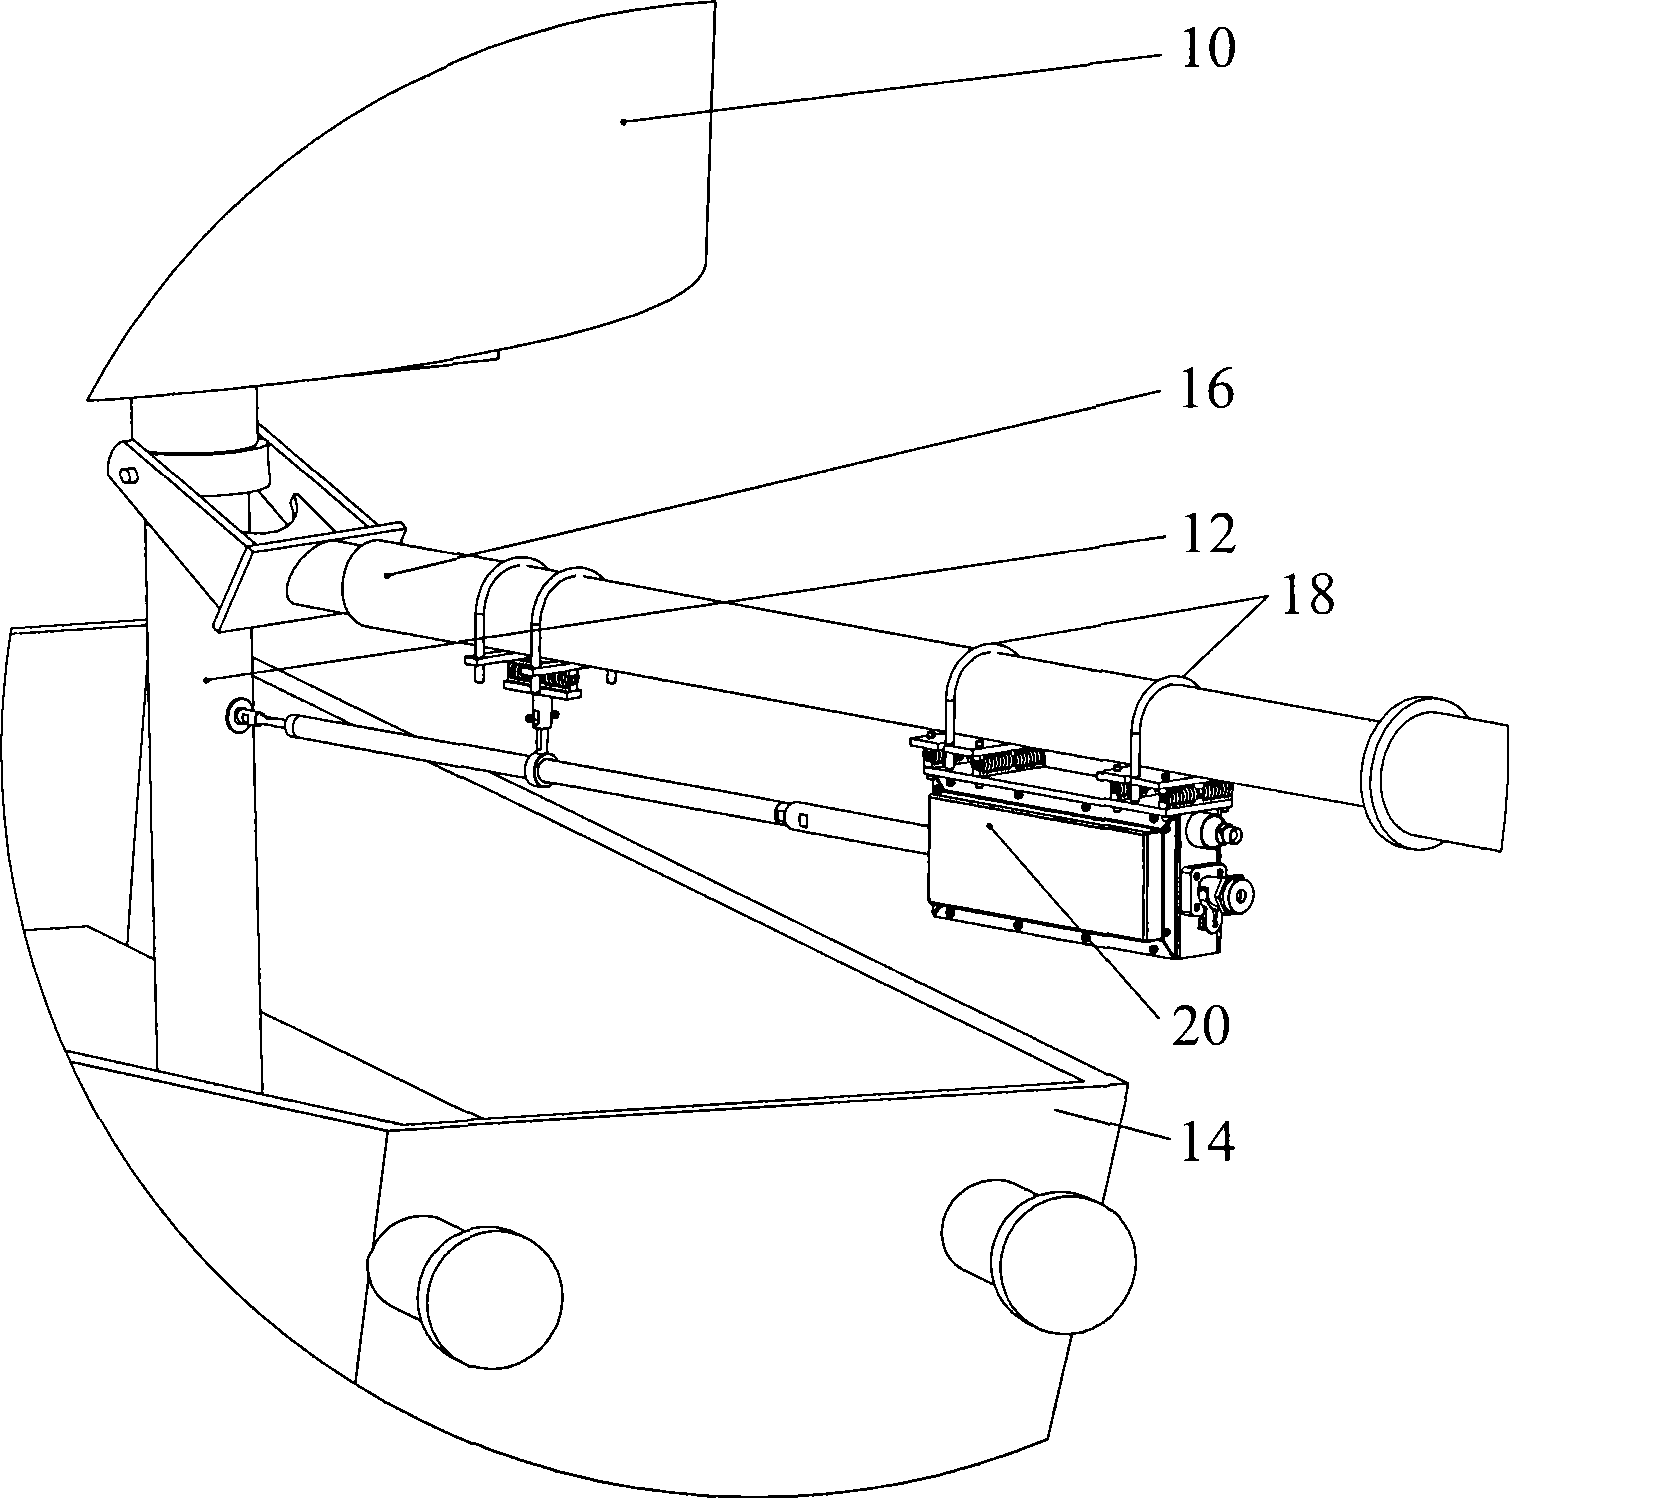 Detecting device of discharging slag from ladle